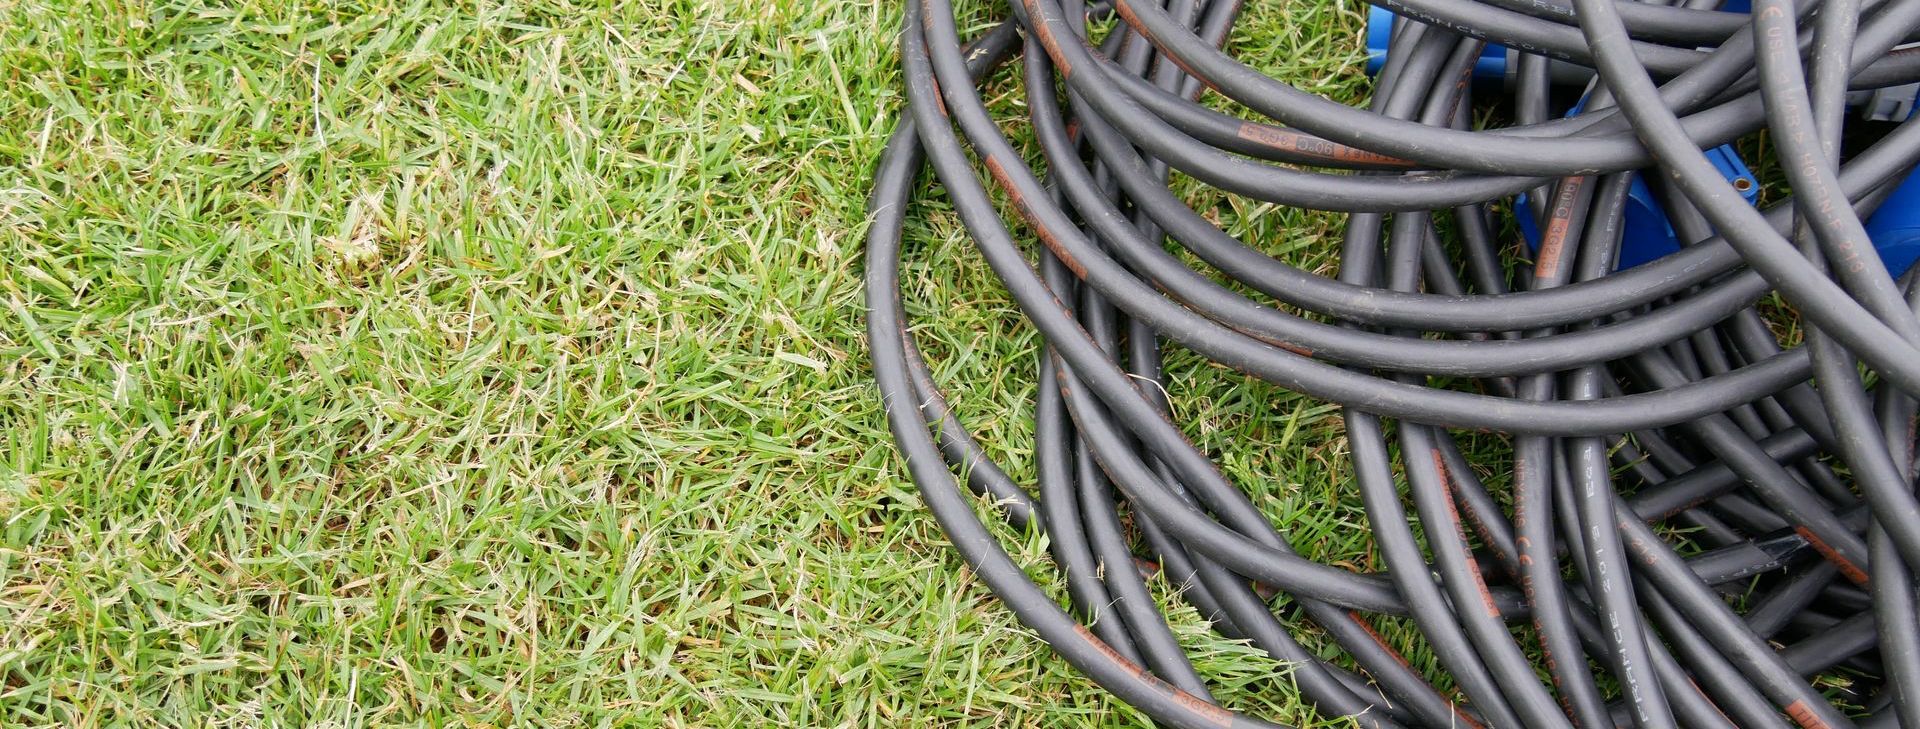 A coil of black cables on green grass